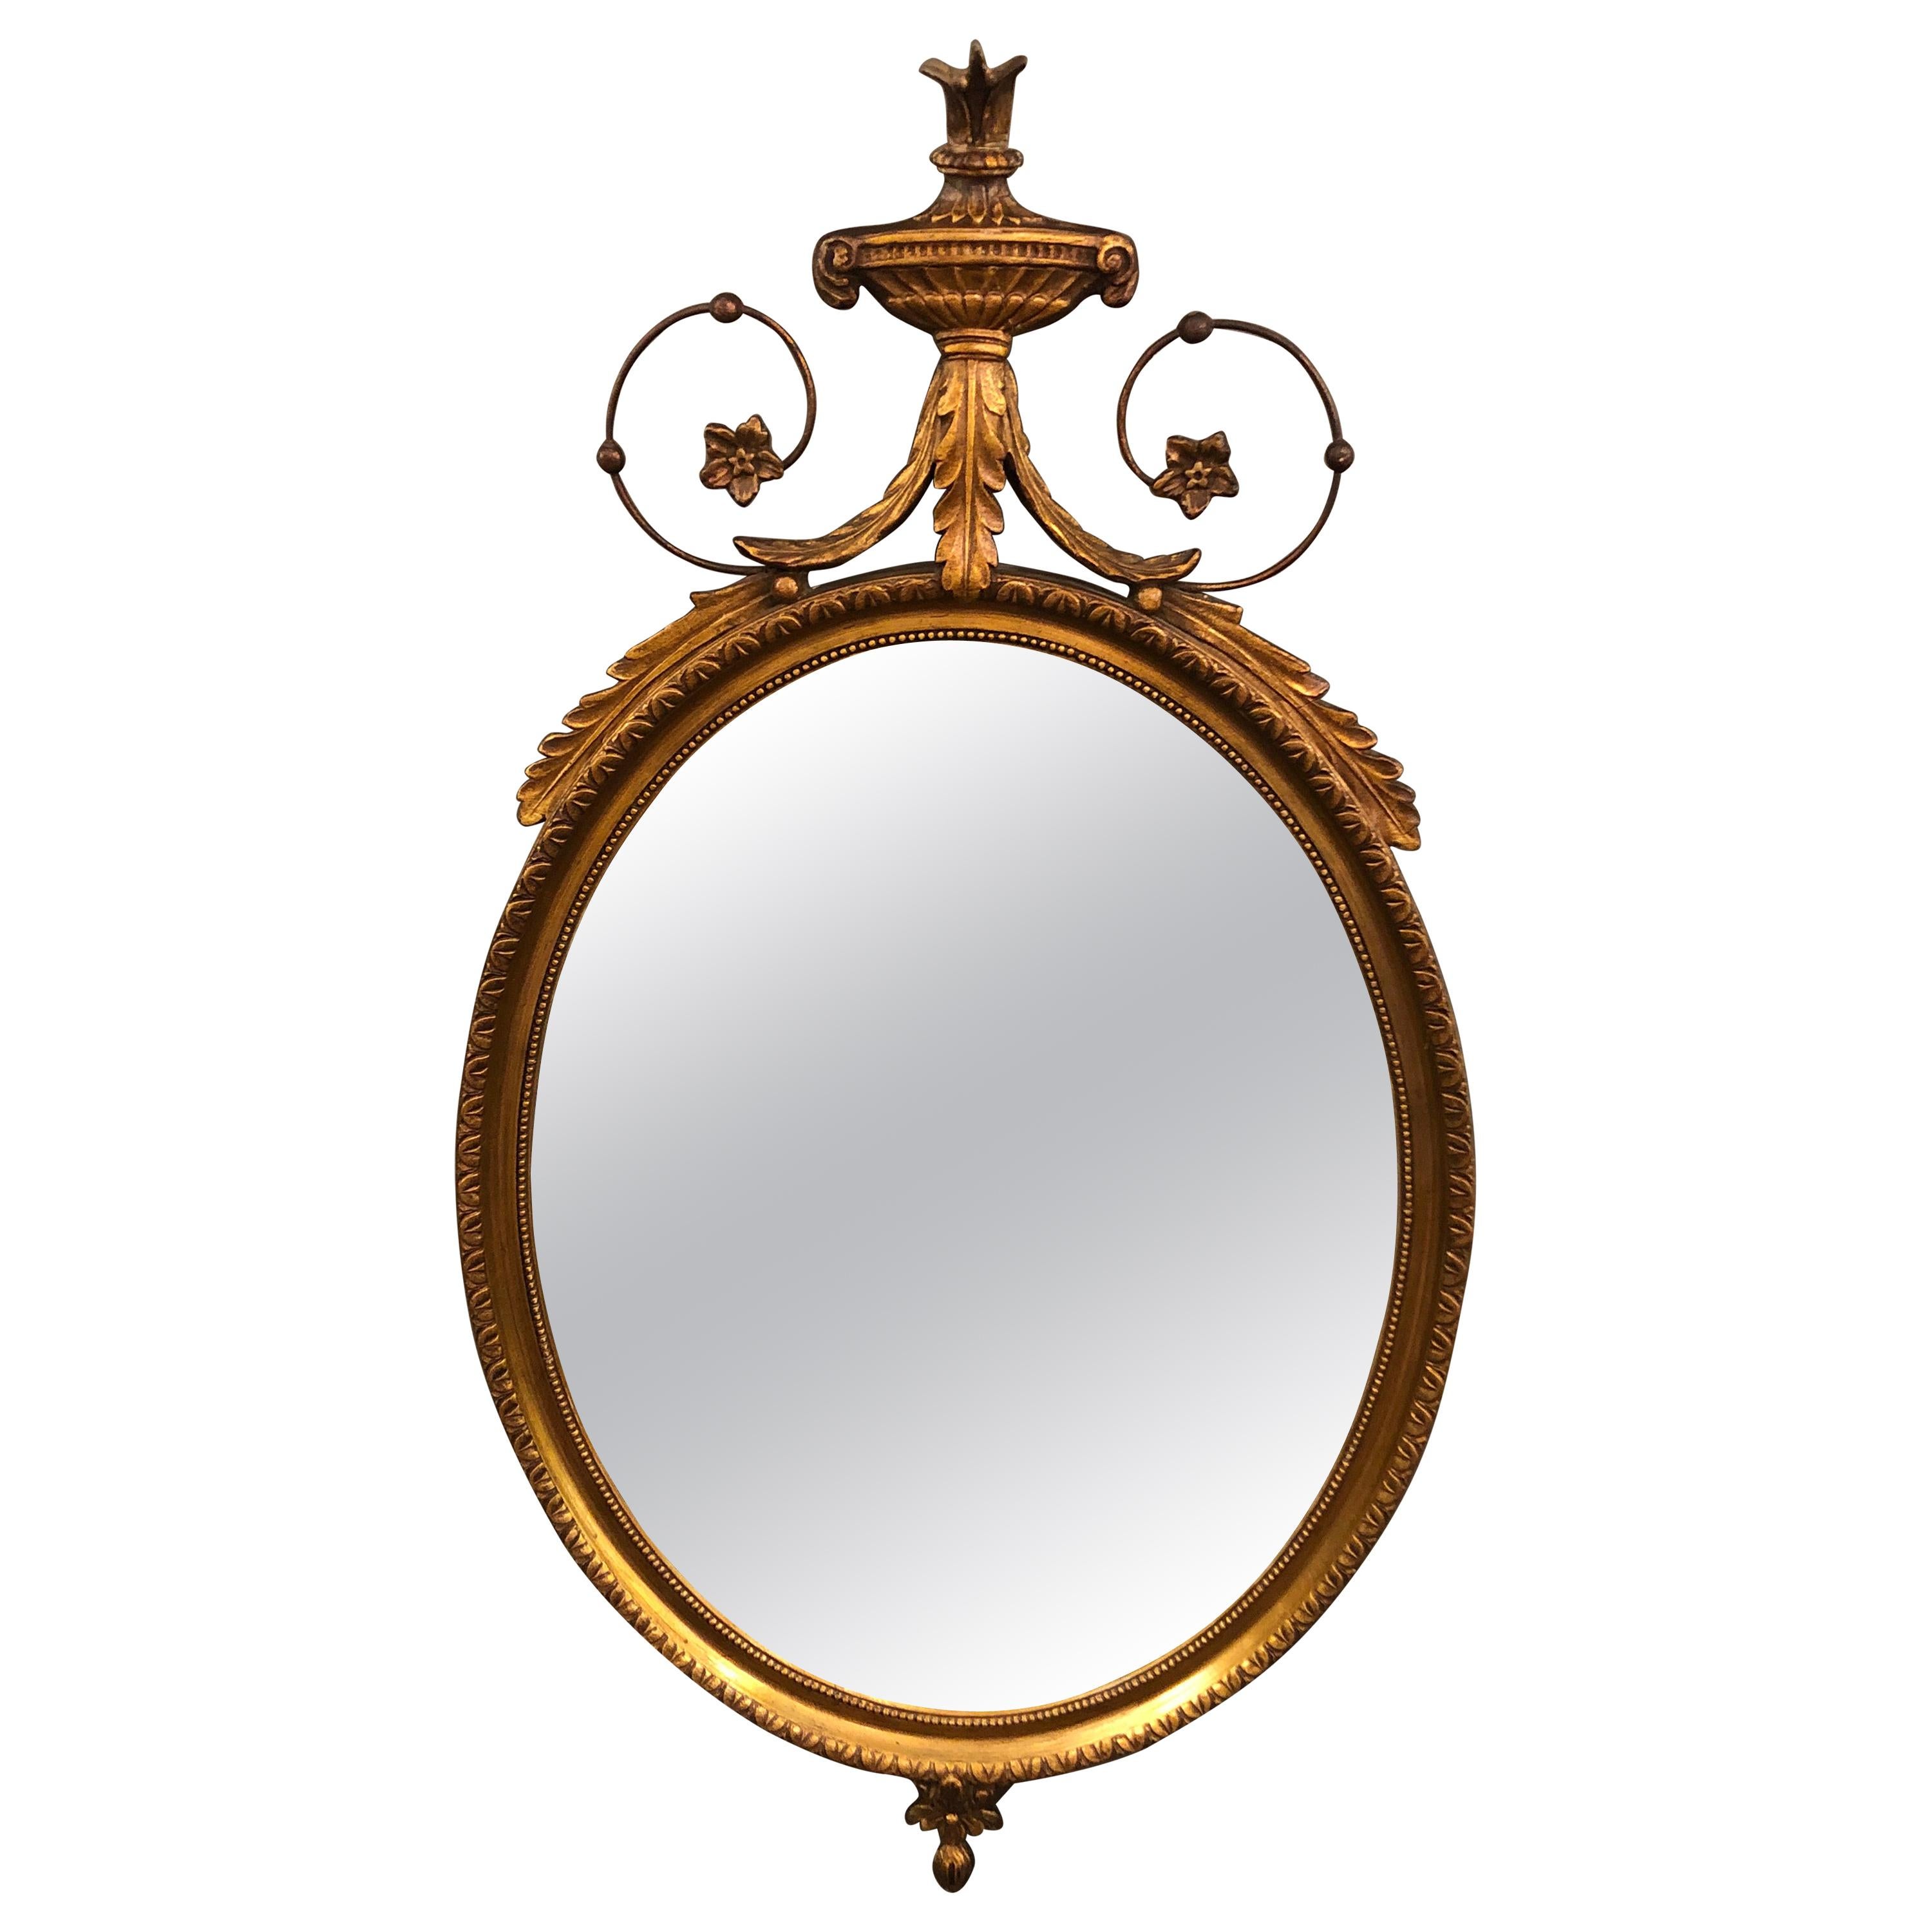 Elegant French 19th Century Neoclassical Giltwood Oval Mirror